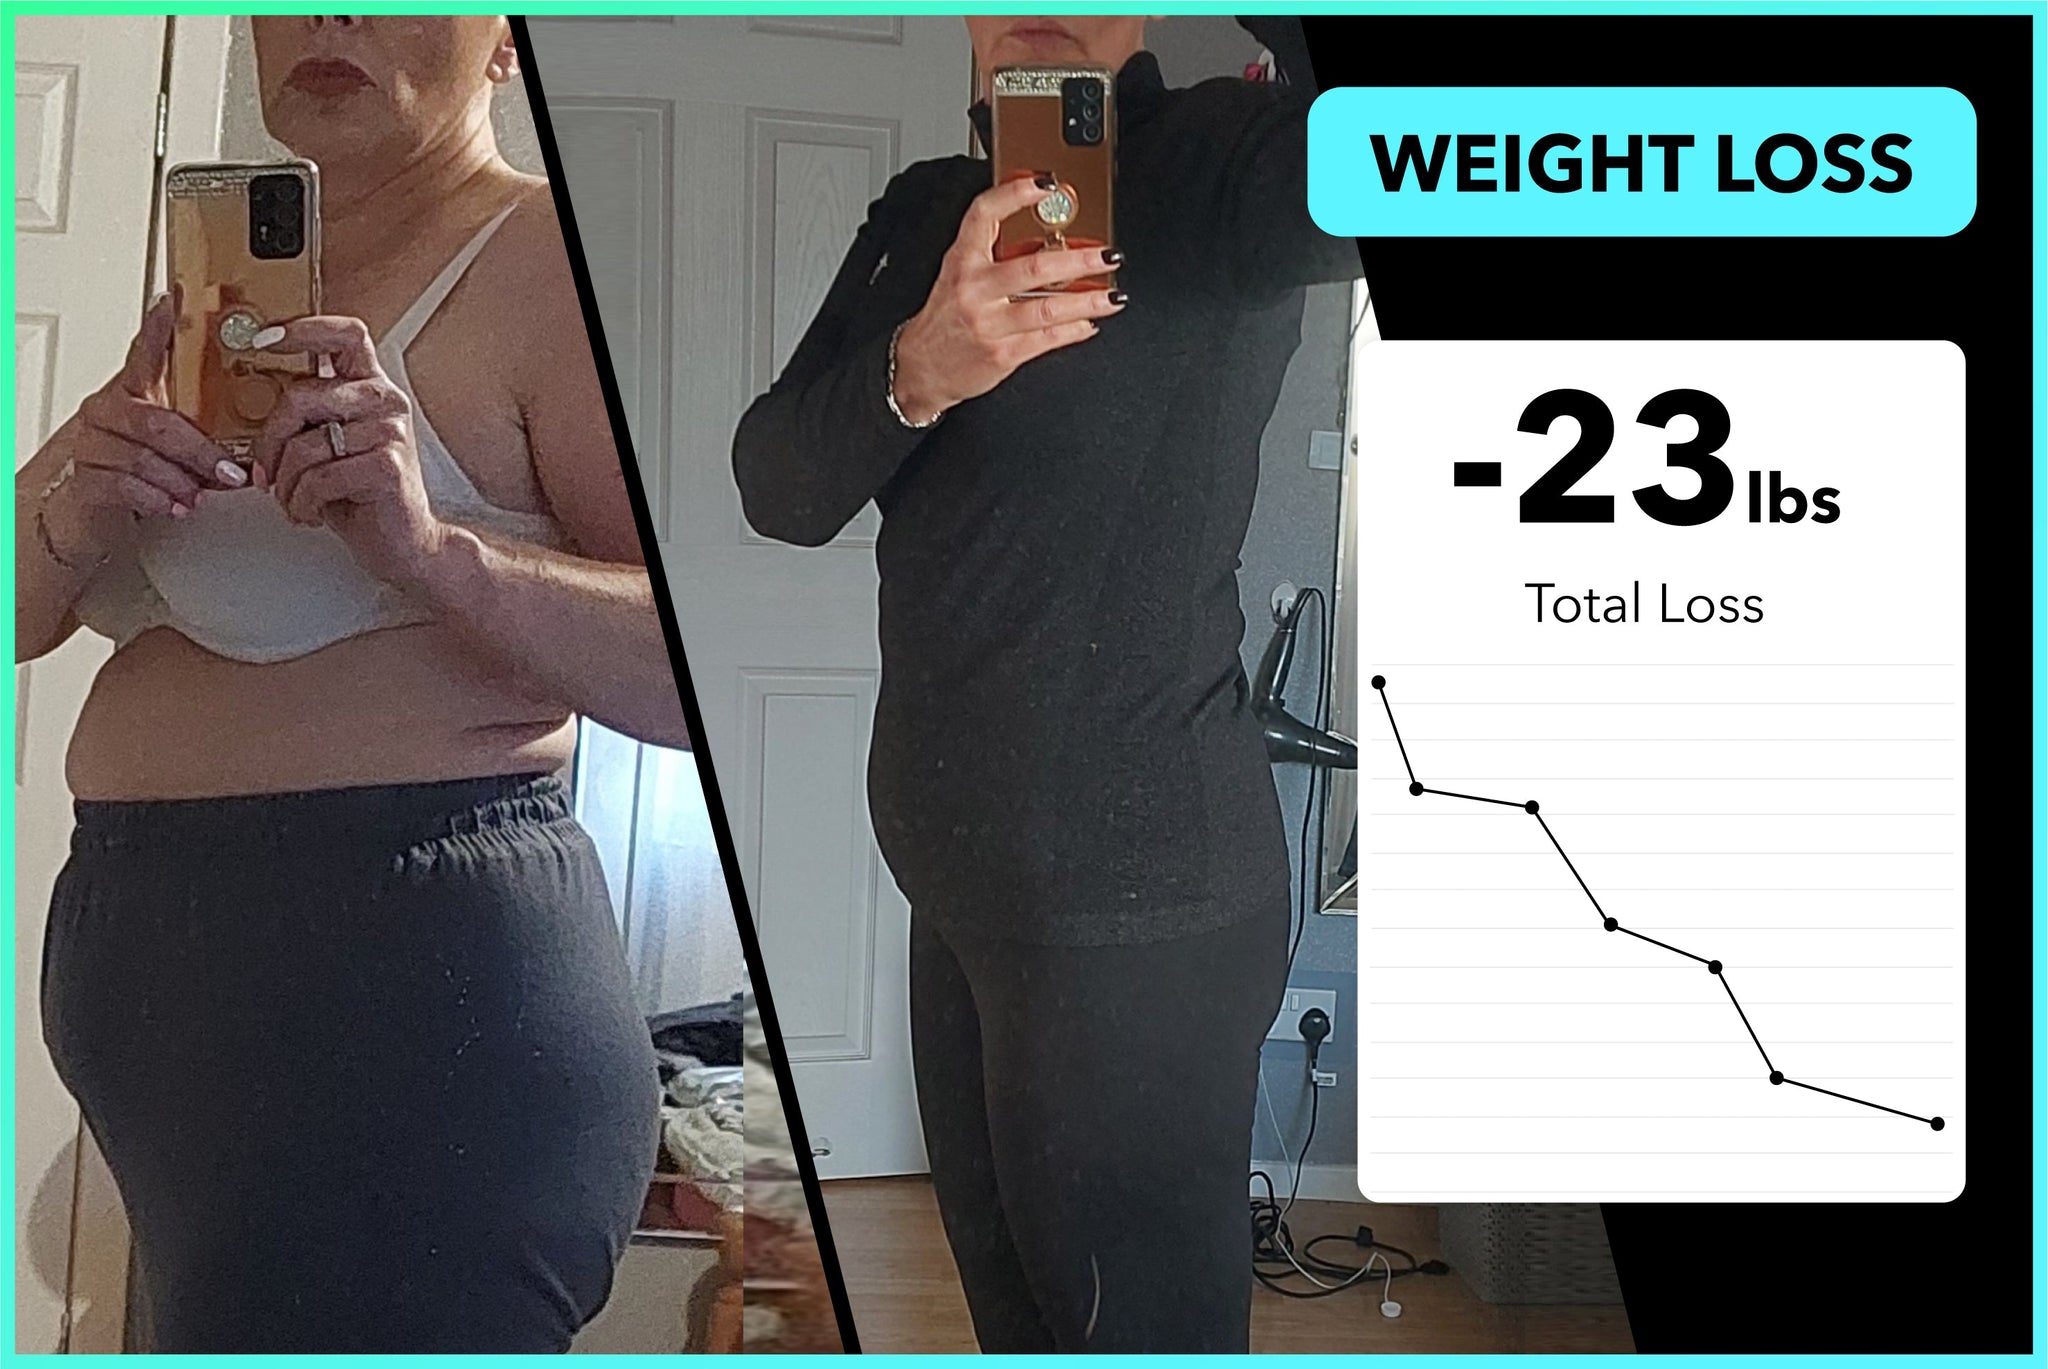 Debbie has lost 23lbs with Team RH!